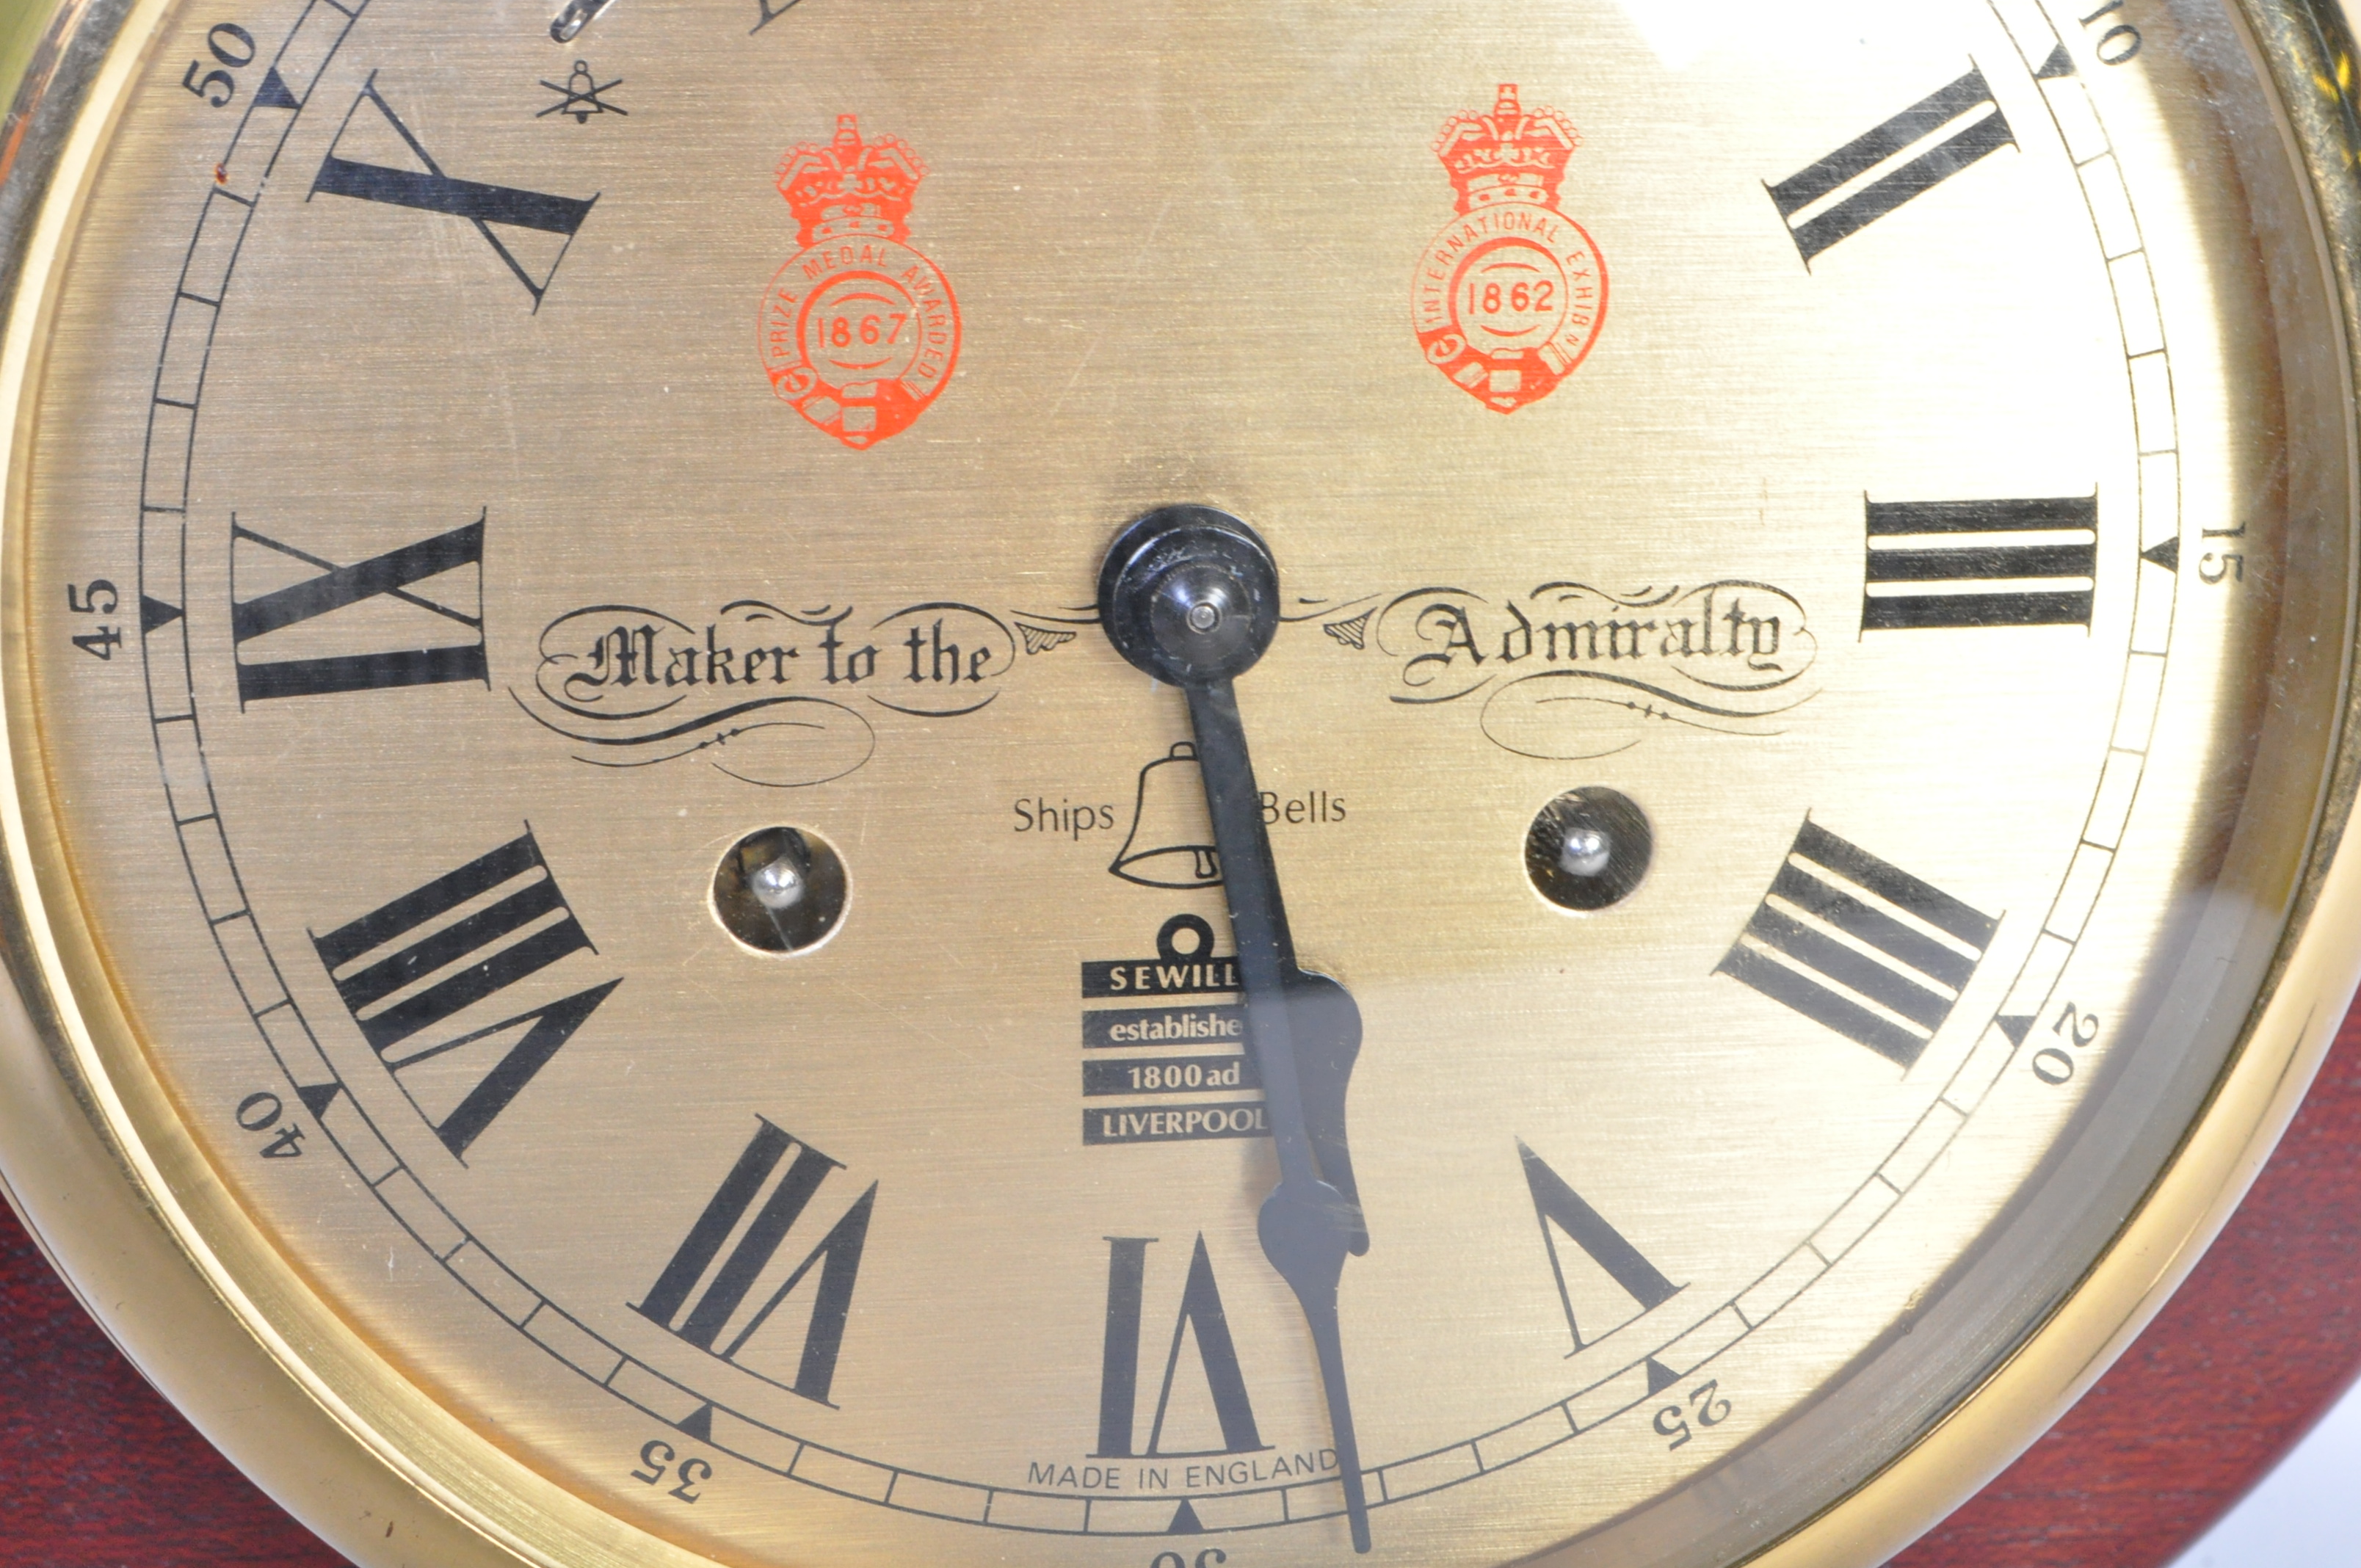 SEWILLS OF LIVERPOOL ROYAL ADMIRALTY SHIPS CLOCK - Image 2 of 6